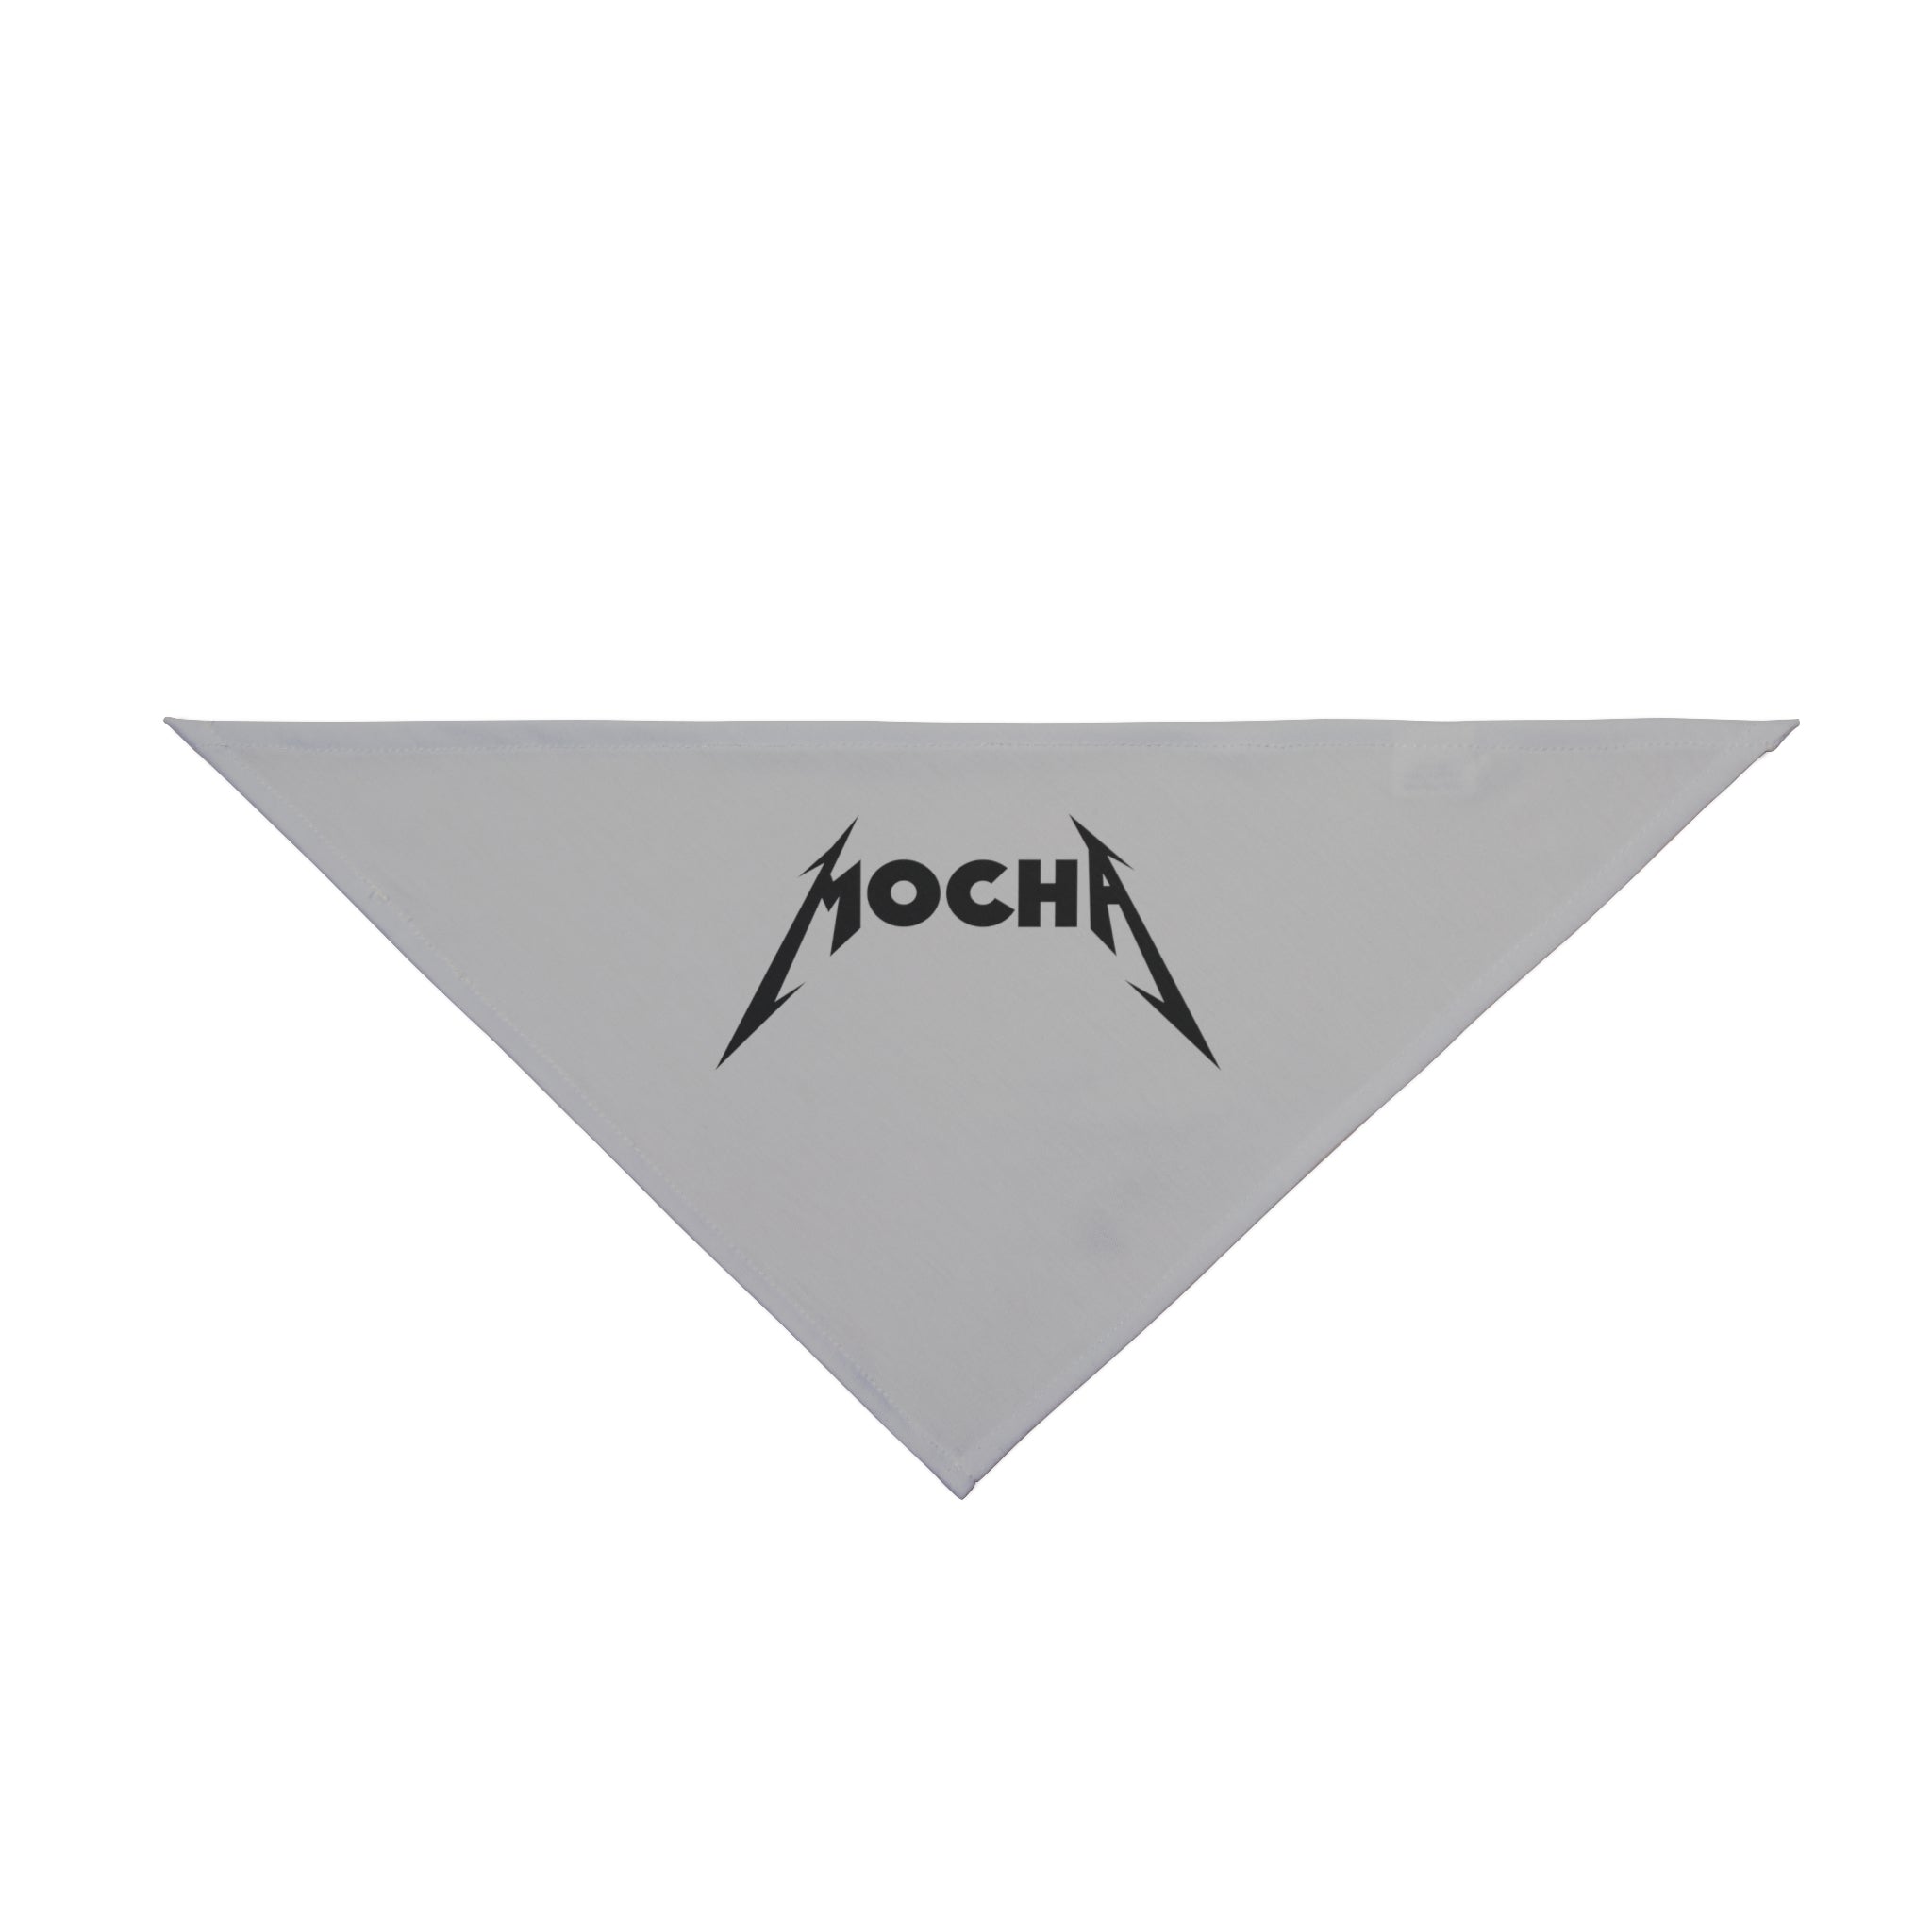 A triangular white pet bandana with the word "MOCHA" printed in a Metallica-like font, crafted from soft-spun polyester for ultimate comfort.